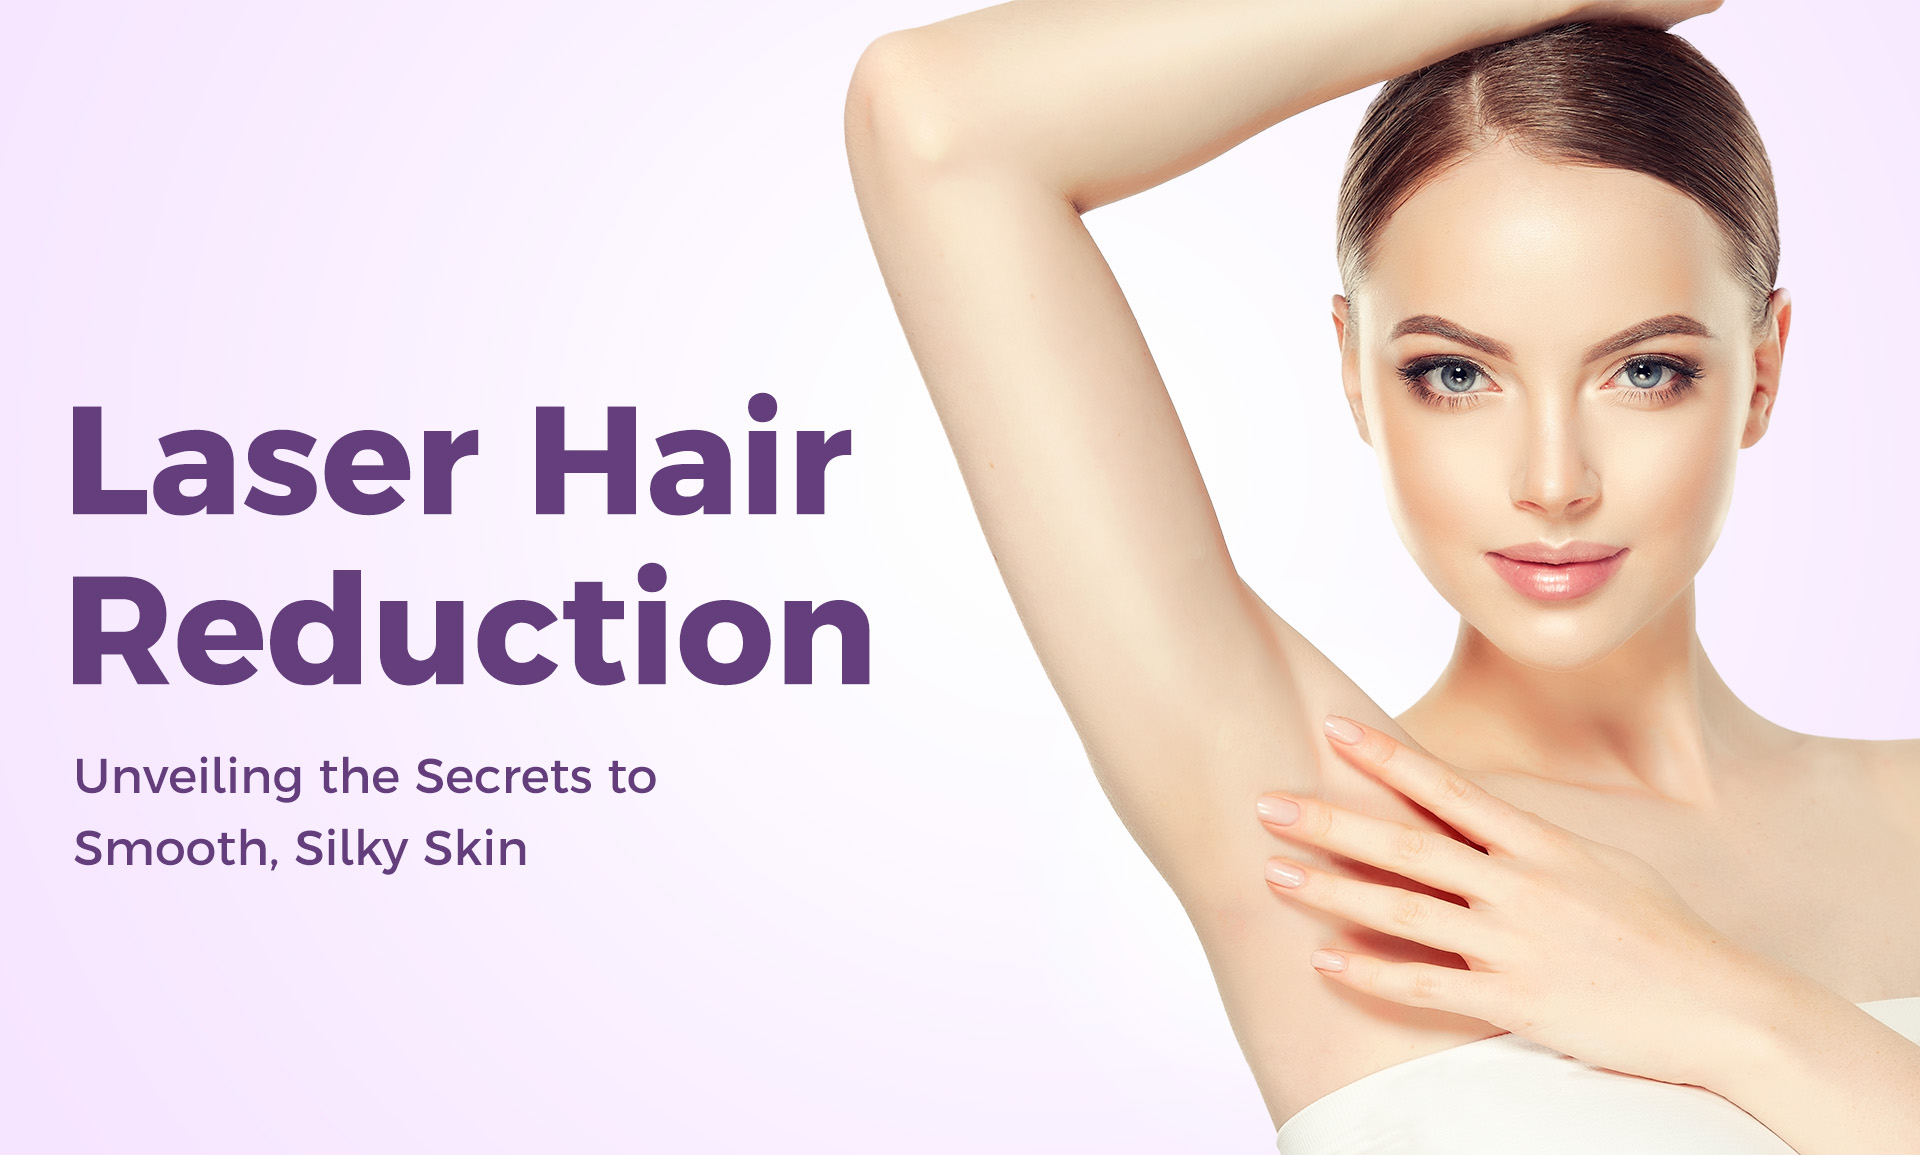 Laser Hair Reduction: Unveiling the Secrets to Smooth, Silky Skin